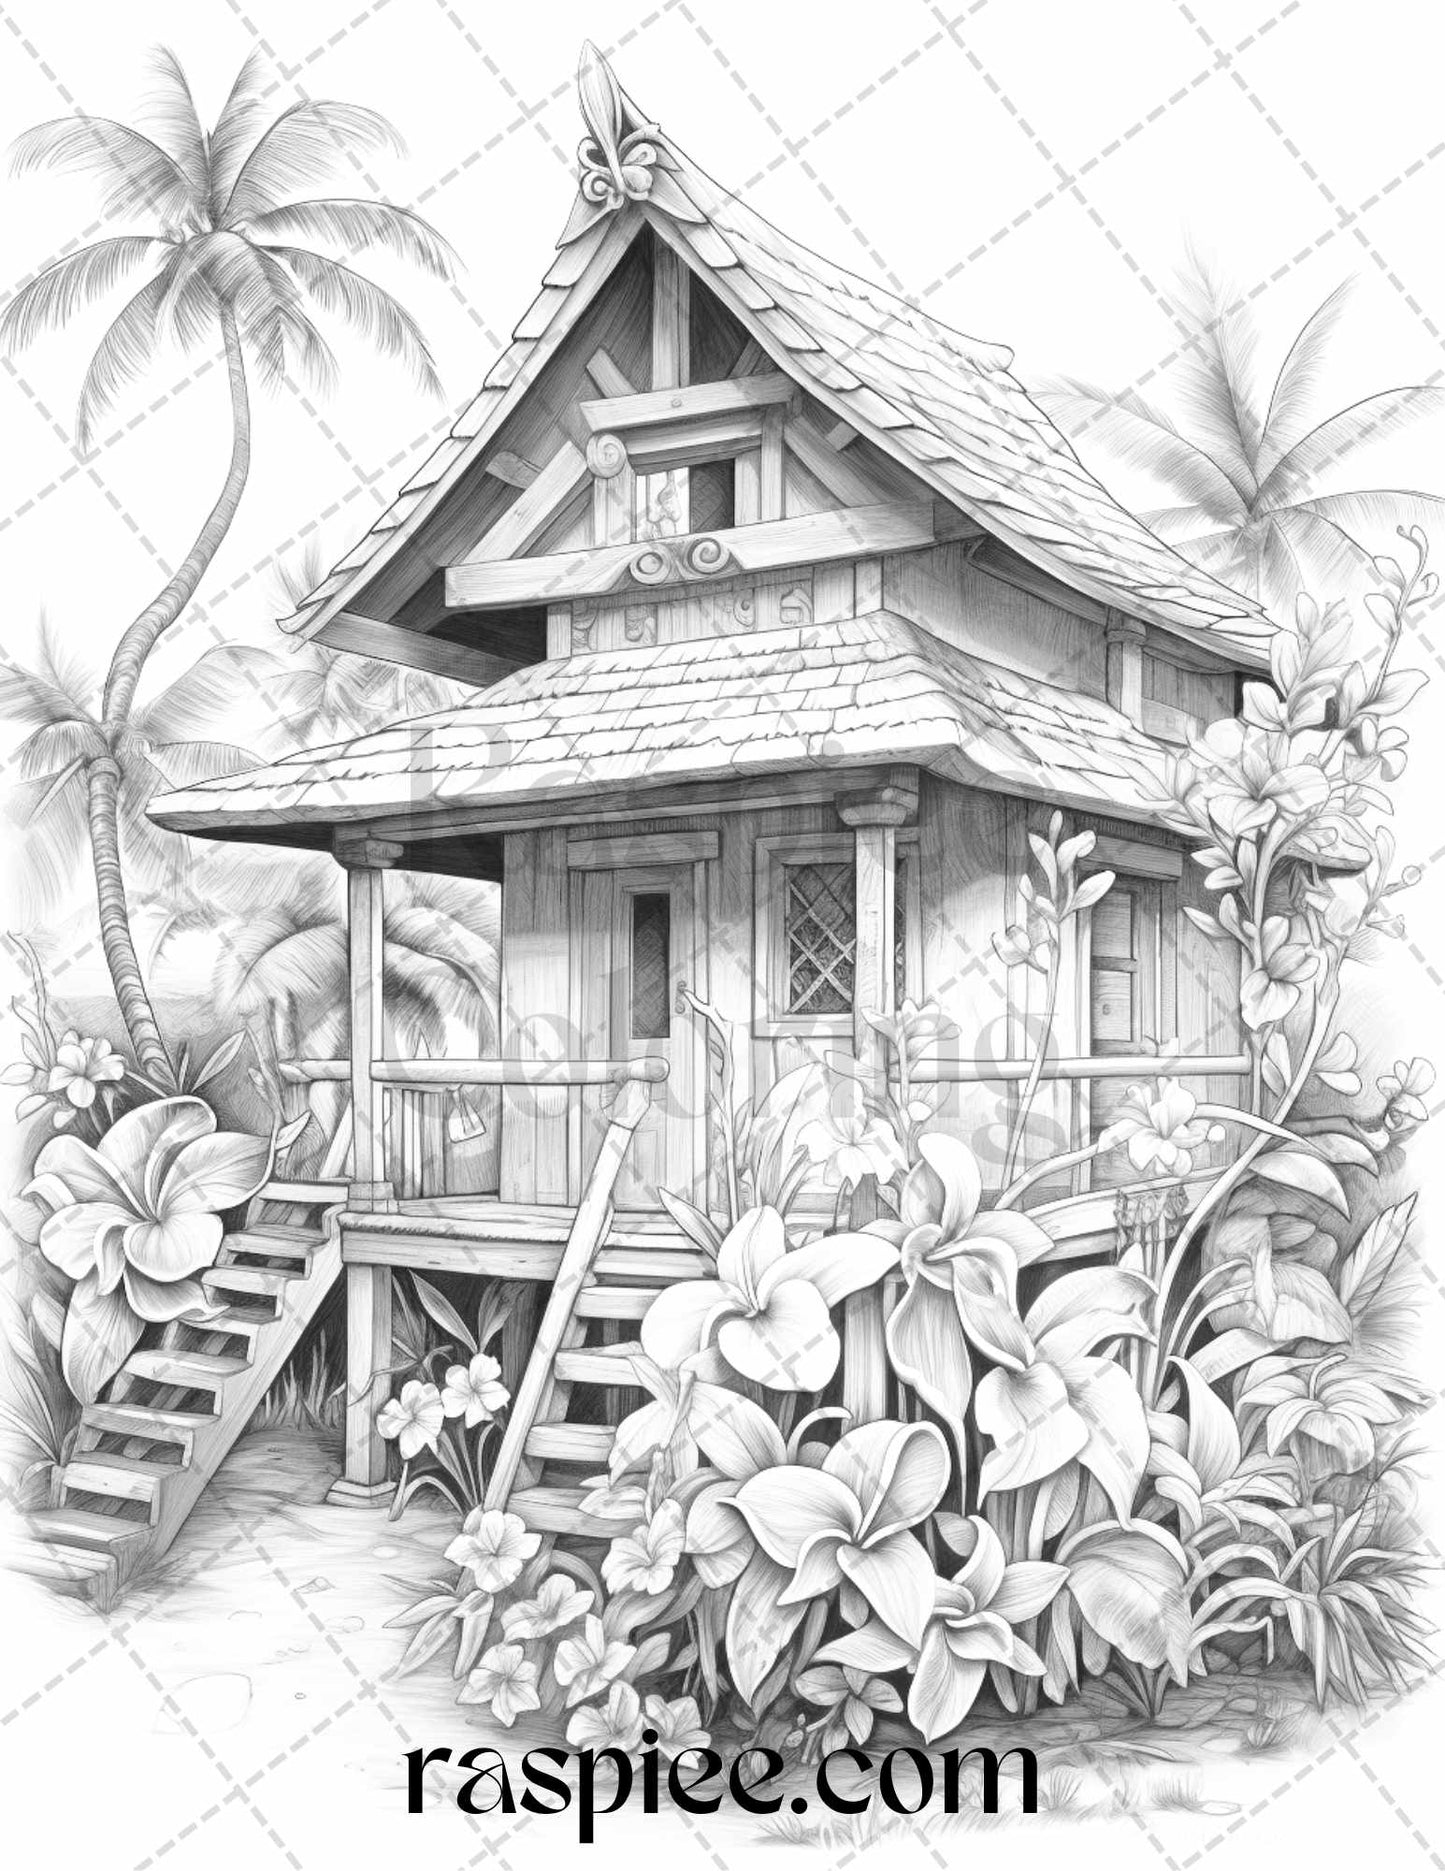 Hawaii Tiki Houses Coloring Pages, Grayscale Adult Coloring Sheets, Relaxation Coloring Pages, Stress Relief Coloring, Vacation Coloring Printables, Tropical Getaway Color Book, Summer Coloring Pages for Adults, Creative DIY Wall Art, Art Therapy Pages